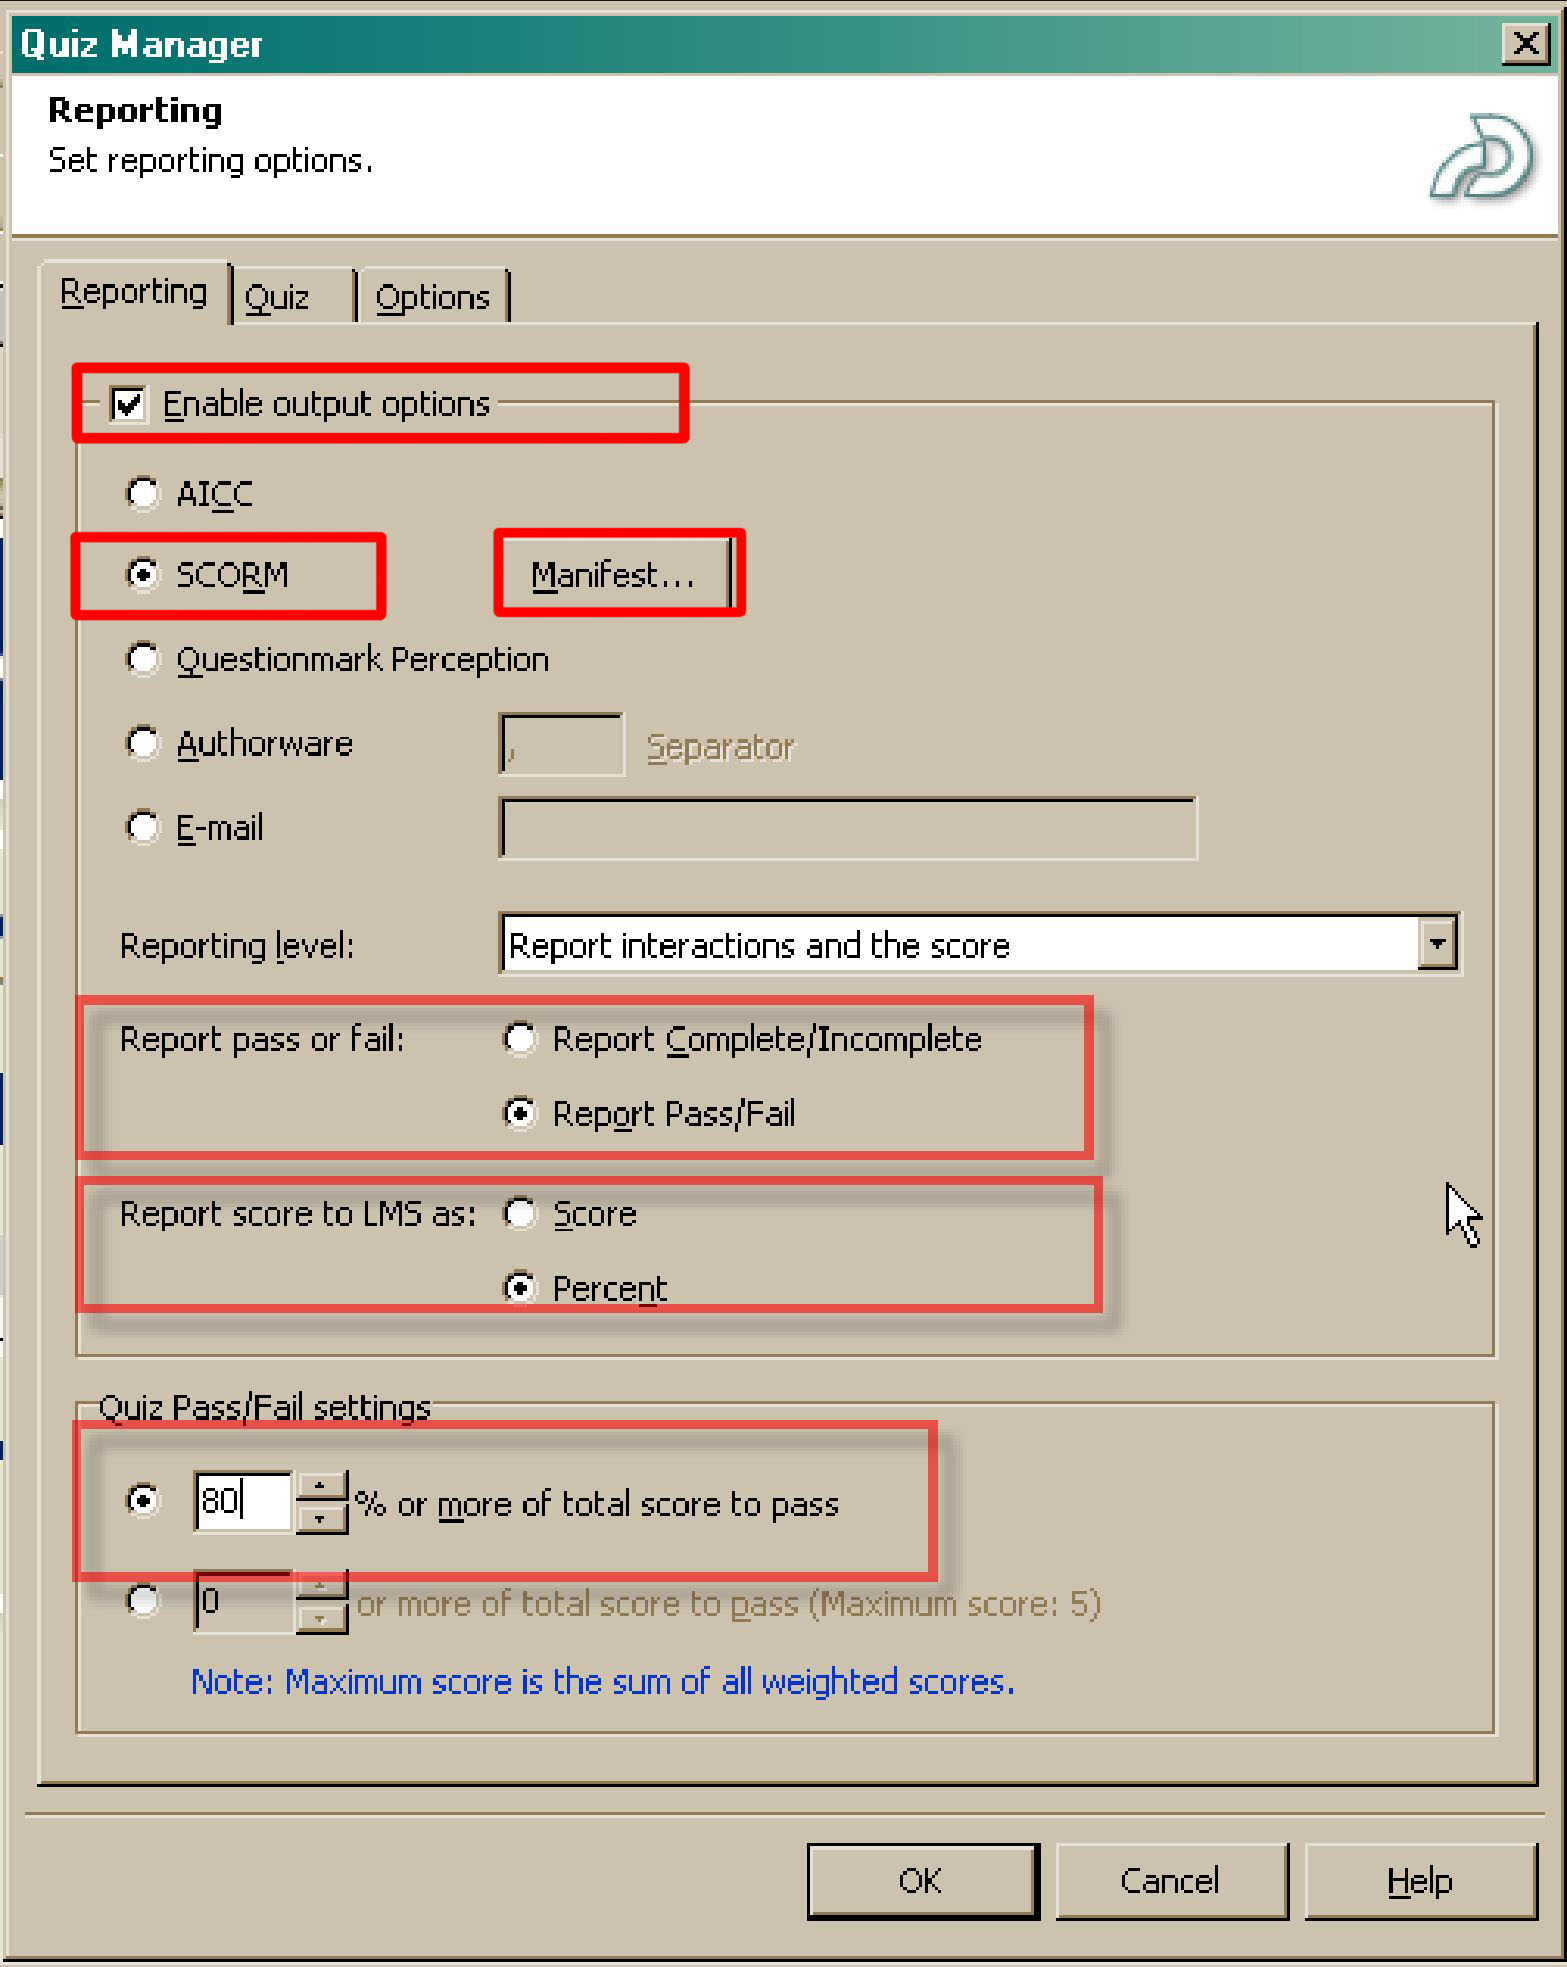 Captivate Quiz Manager reporting settings